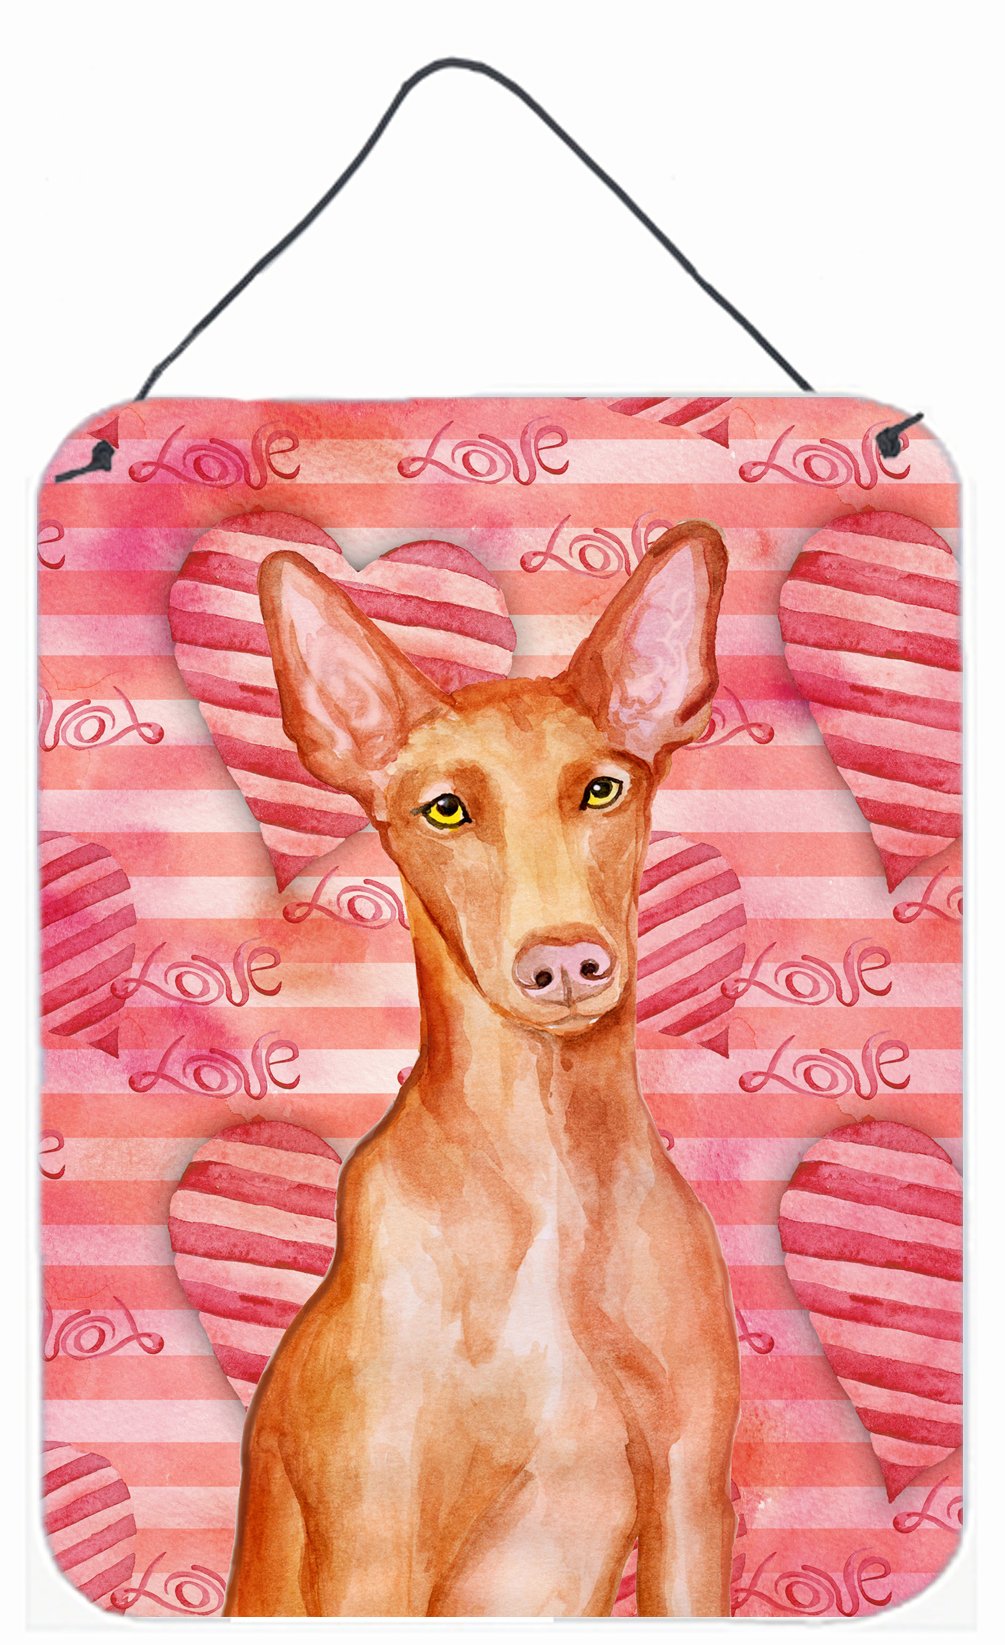 Pharaoh Hound Love Wall or Door Hanging Prints BB9802DS1216 by Caroline's Treasures